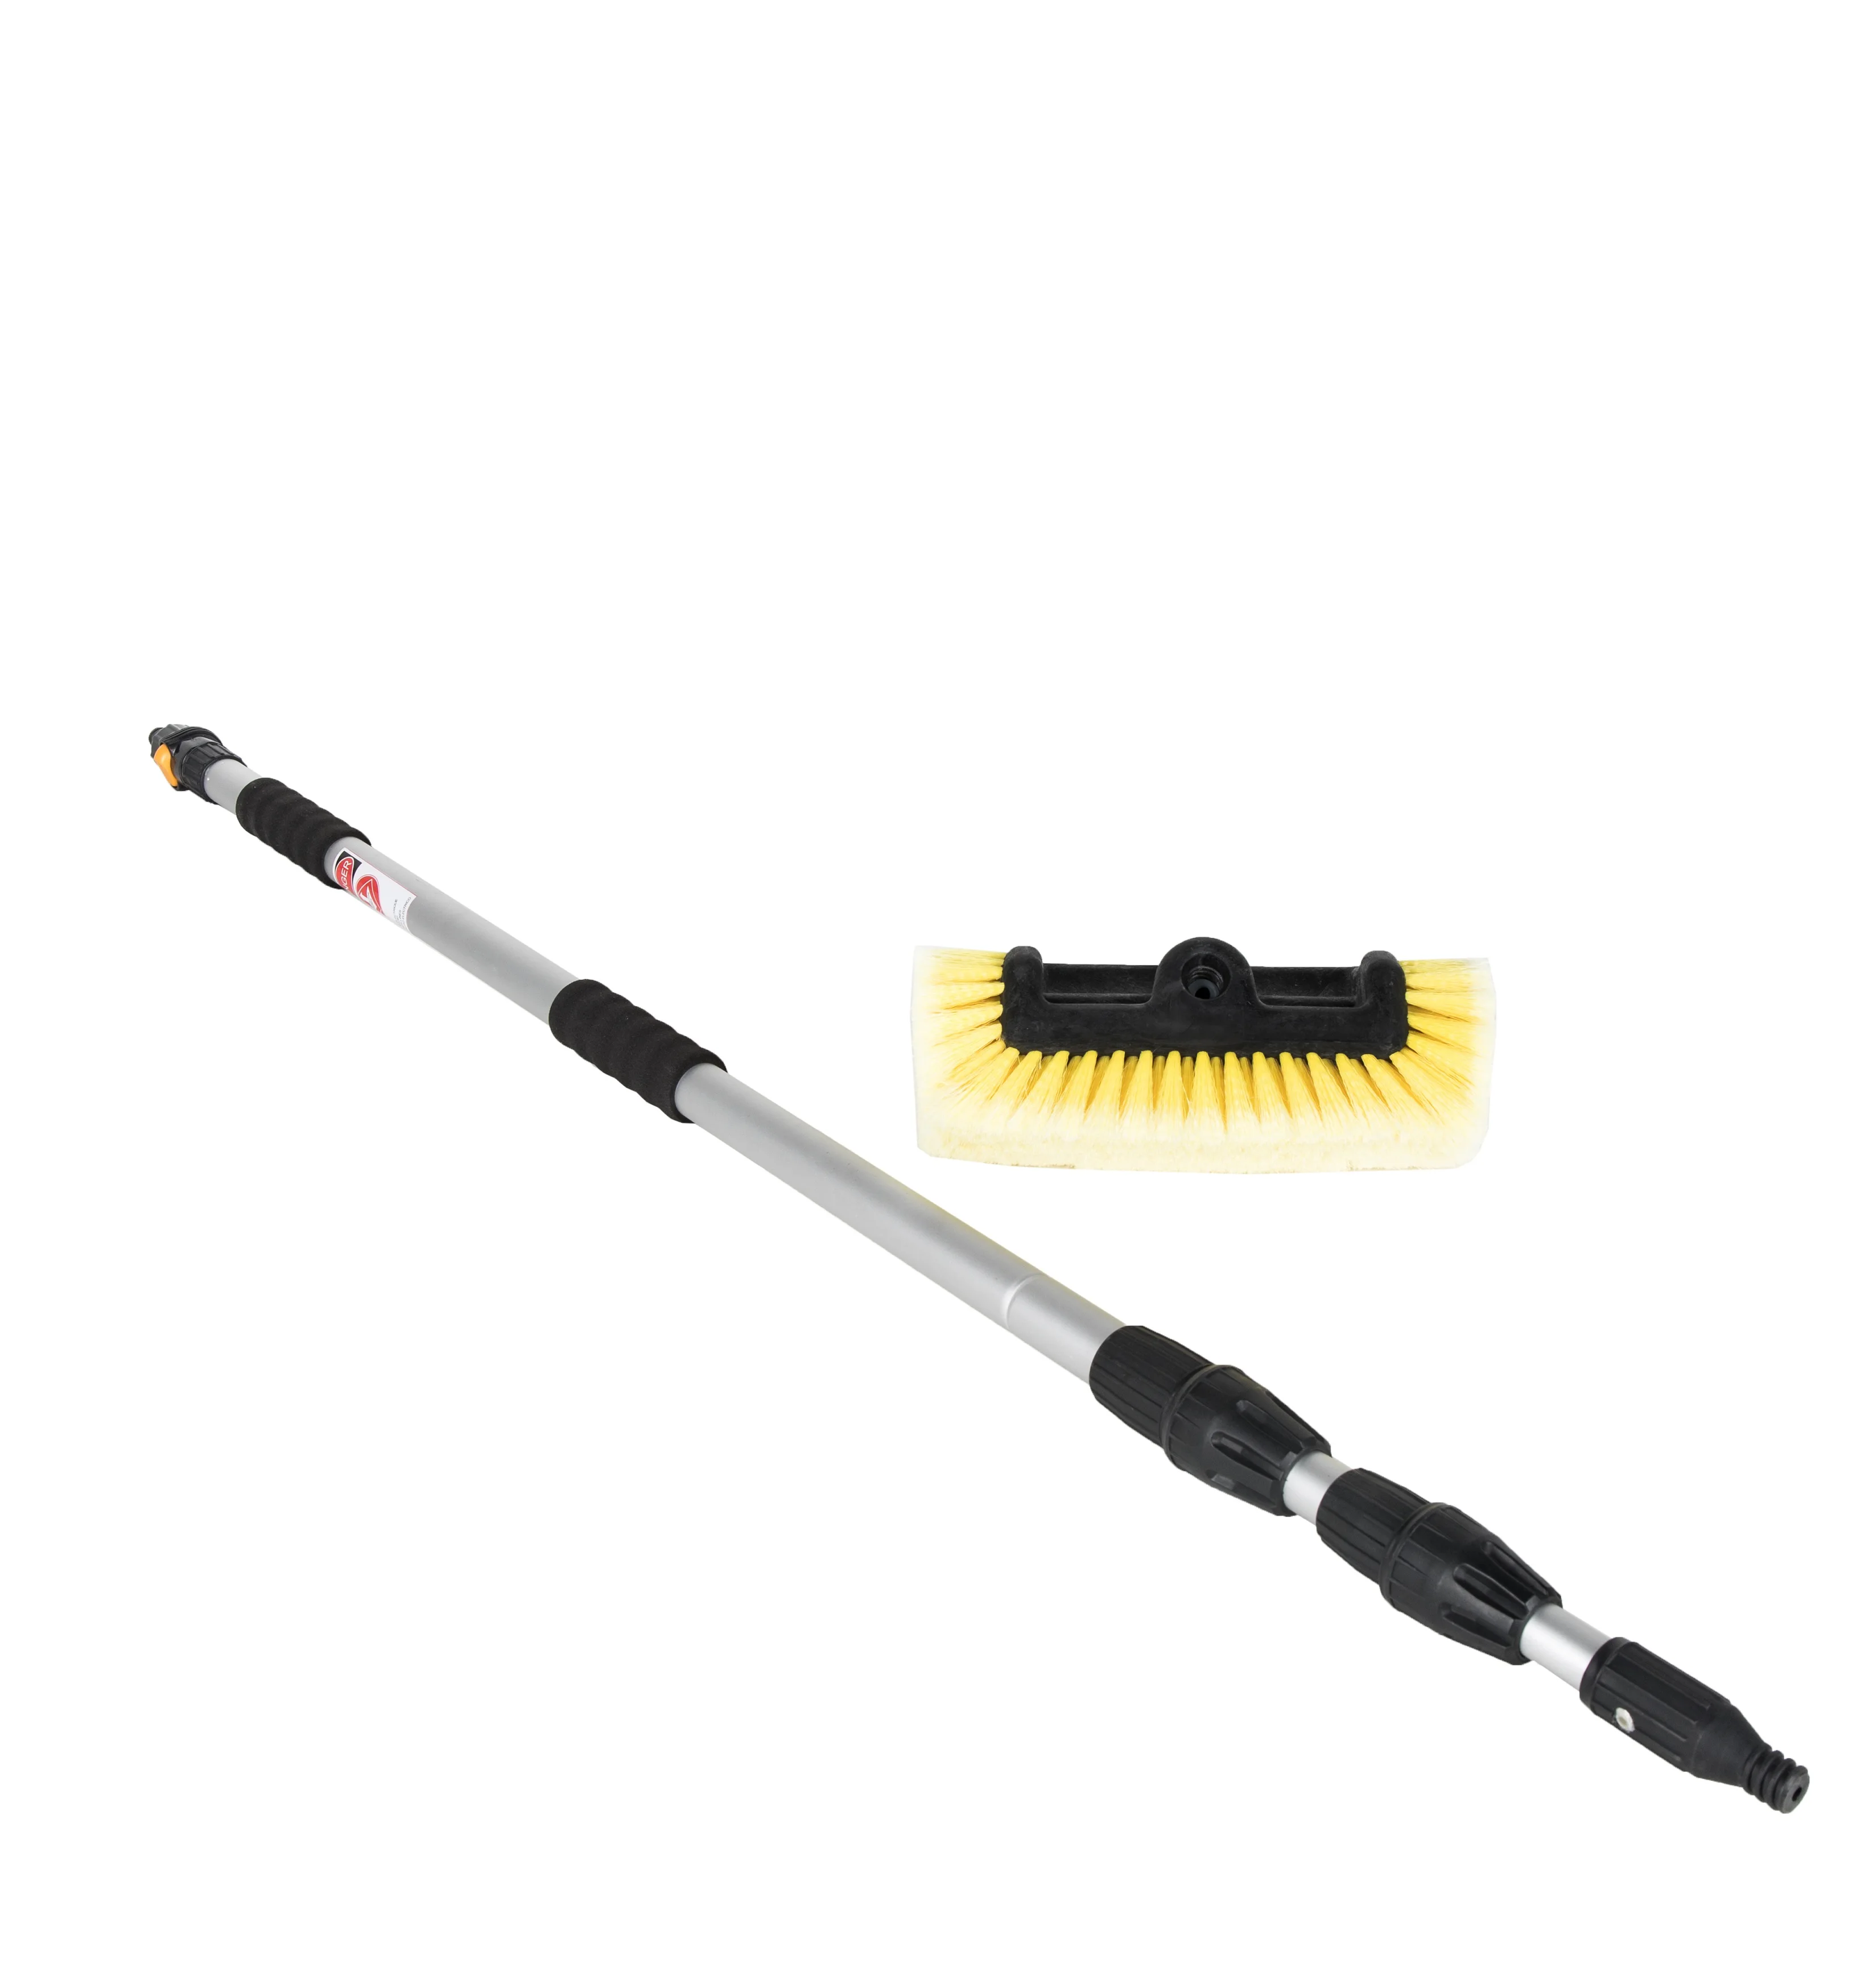 Car Cleaning brush head with extension pole